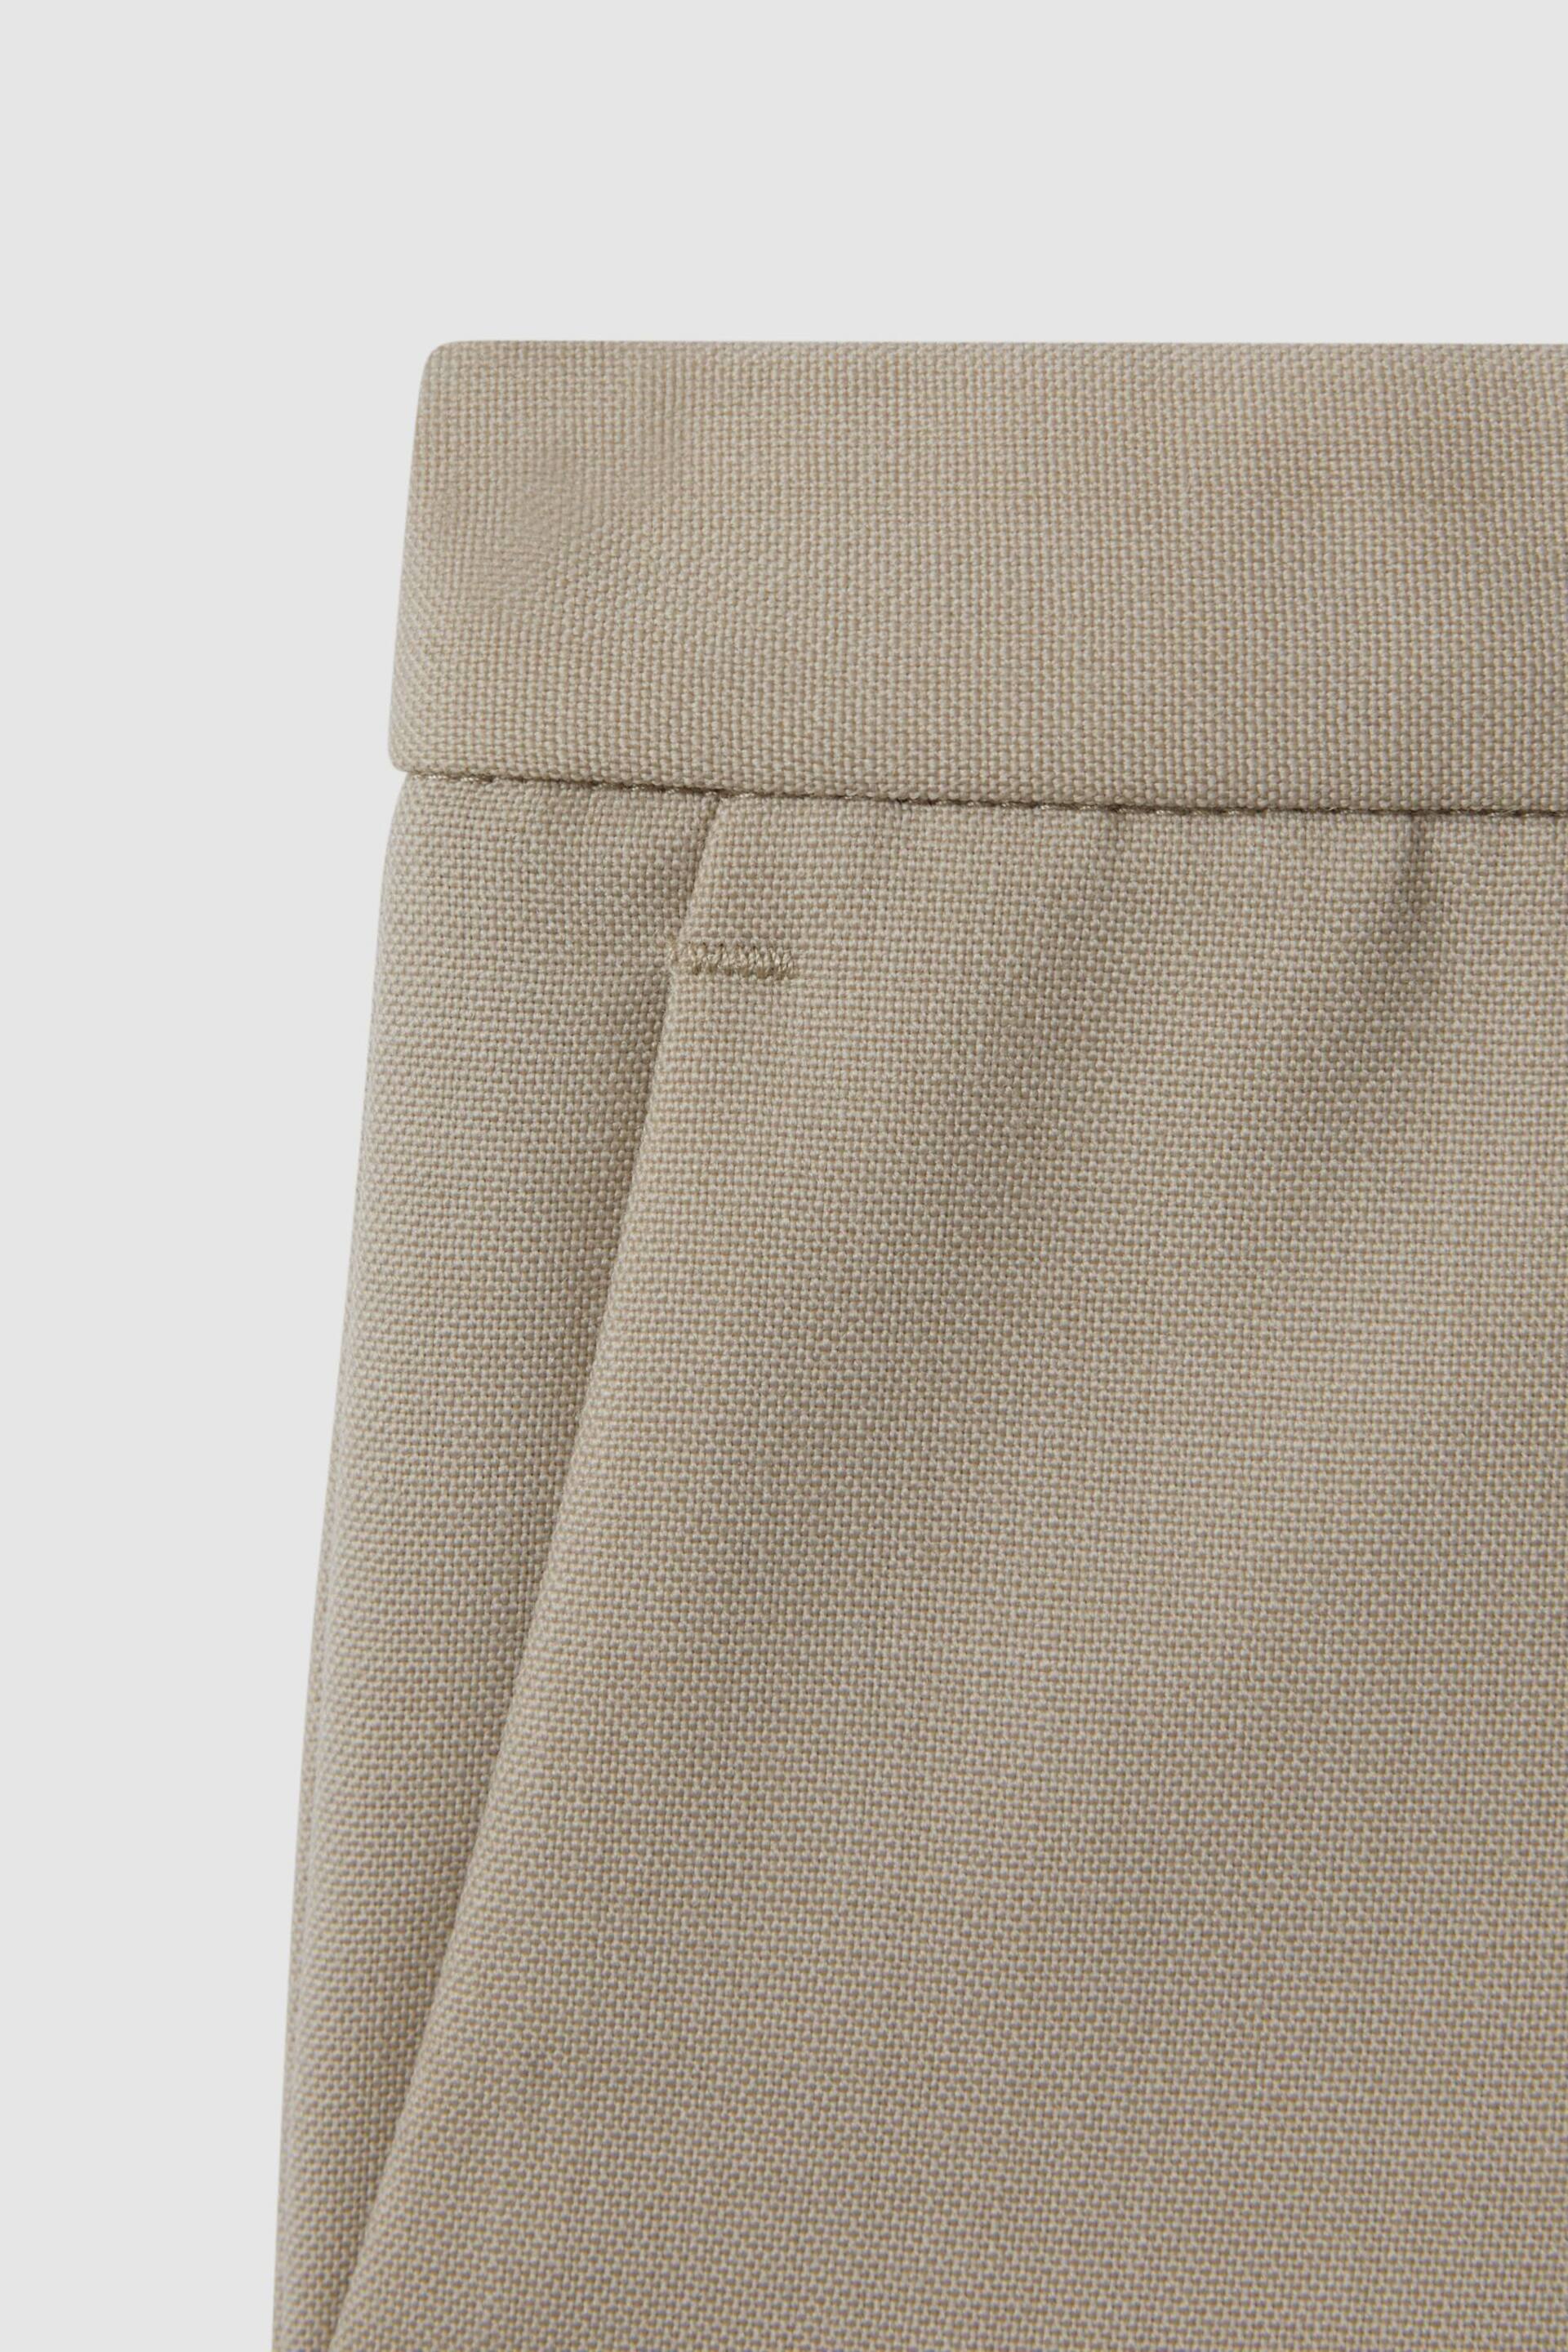 Reiss Stone Fine Senior Wool Side Adjusters Trousers - Image 4 of 4